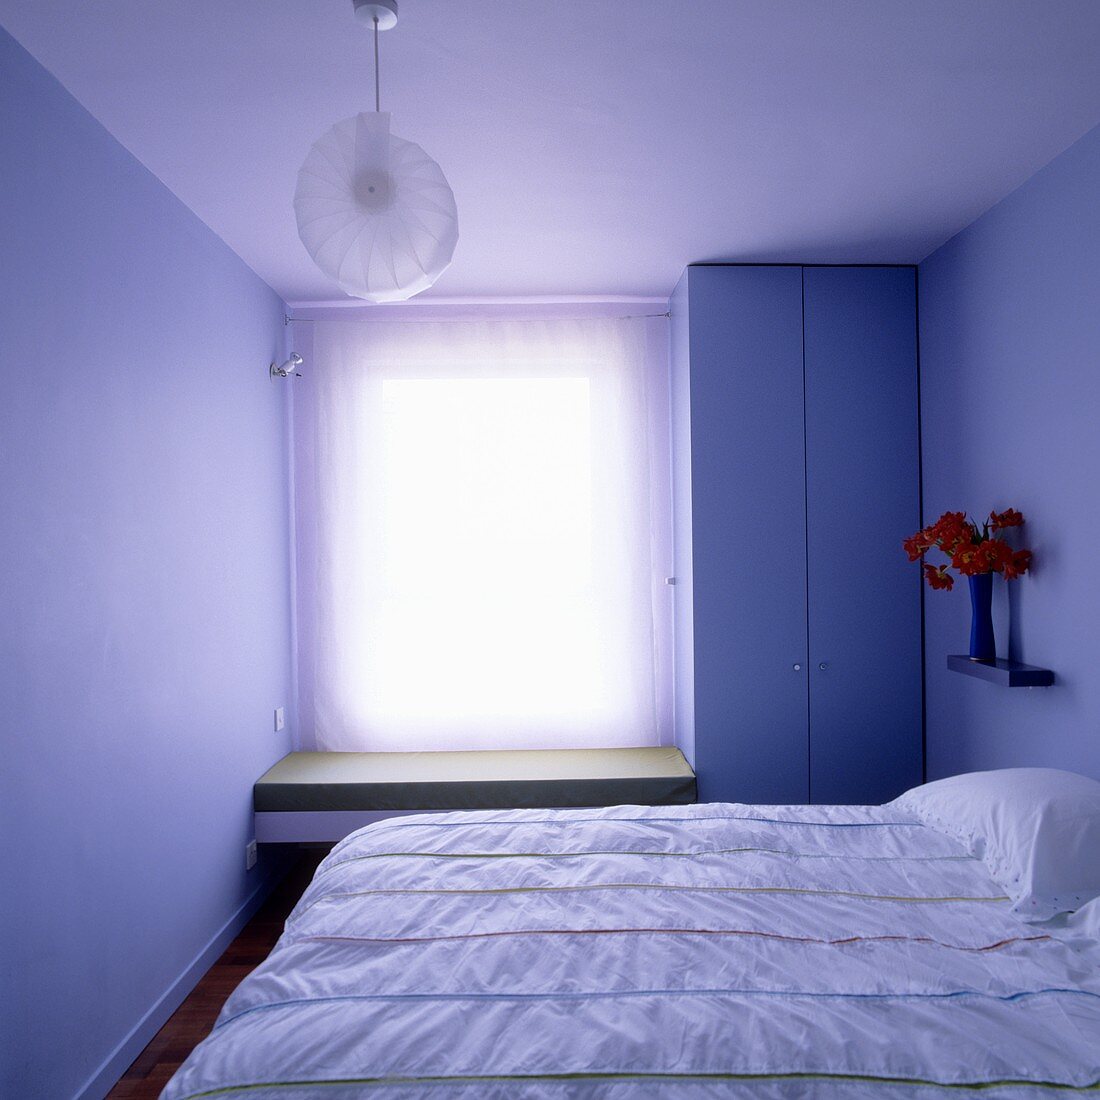 A small bedroom with a blind at the window and floor-to-ceiling wardrode